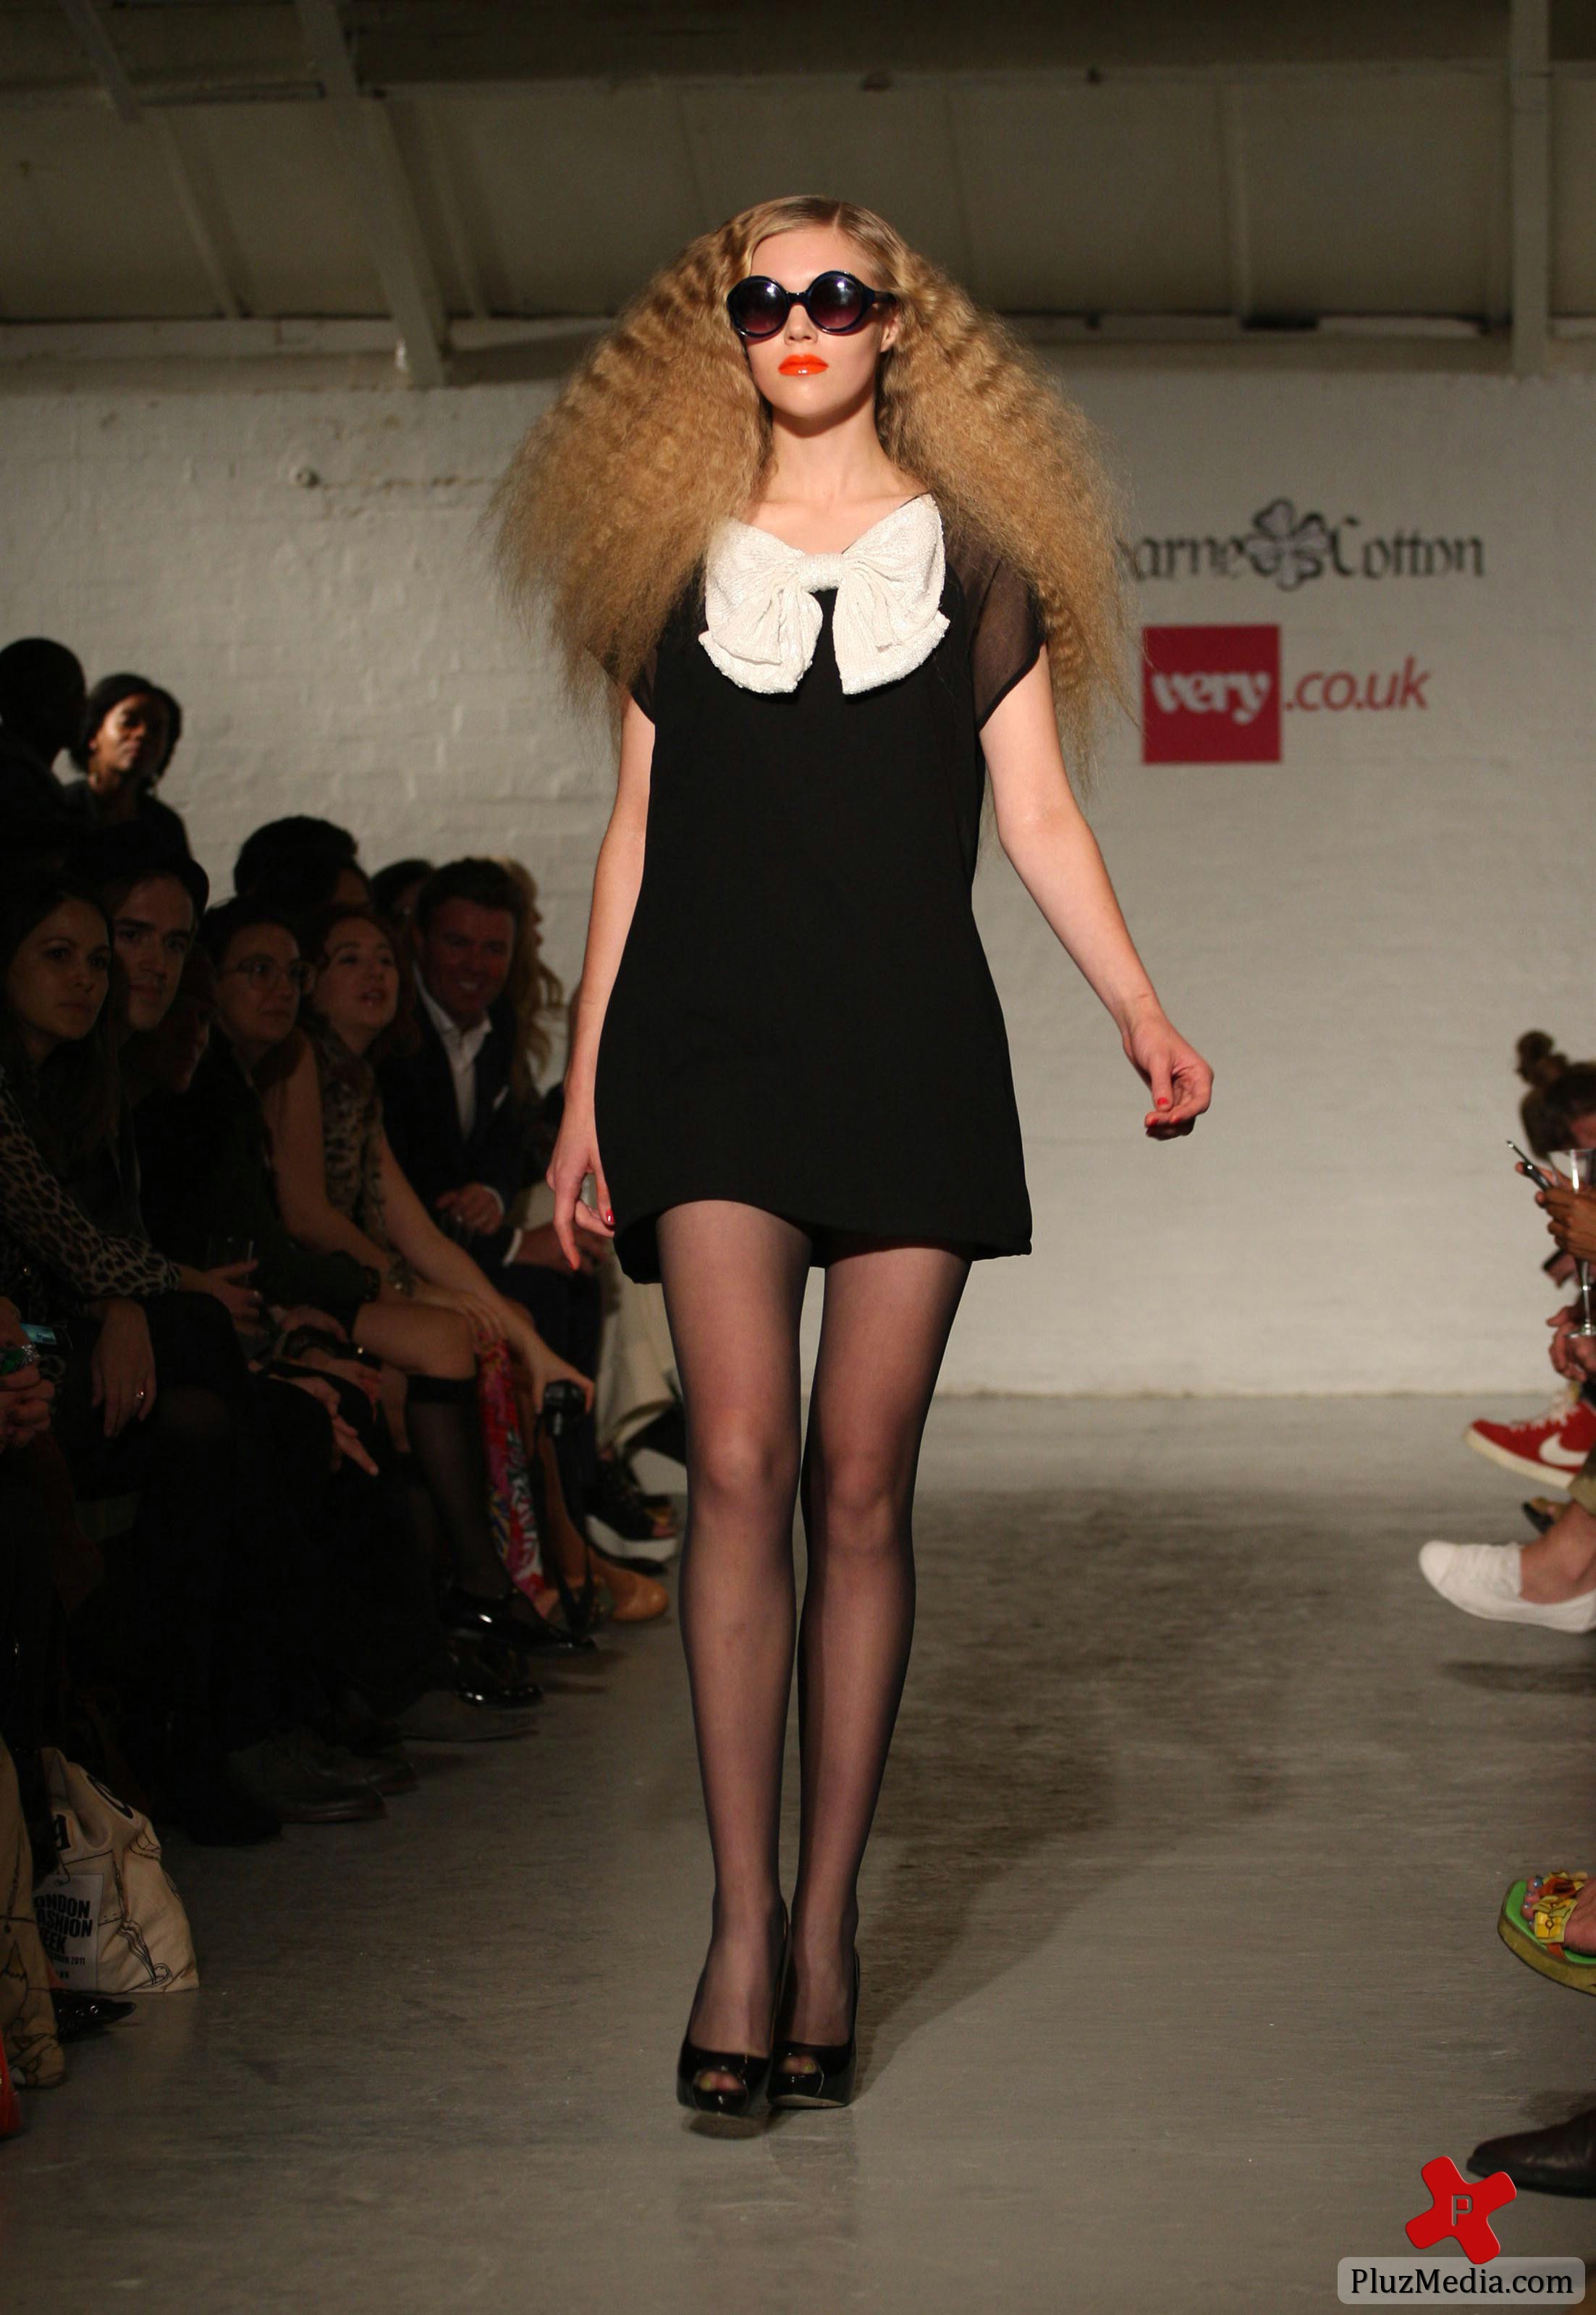 London Fashion Week Spring Summer 2012 - Very.co.uk - Catwalk | Picture 83206